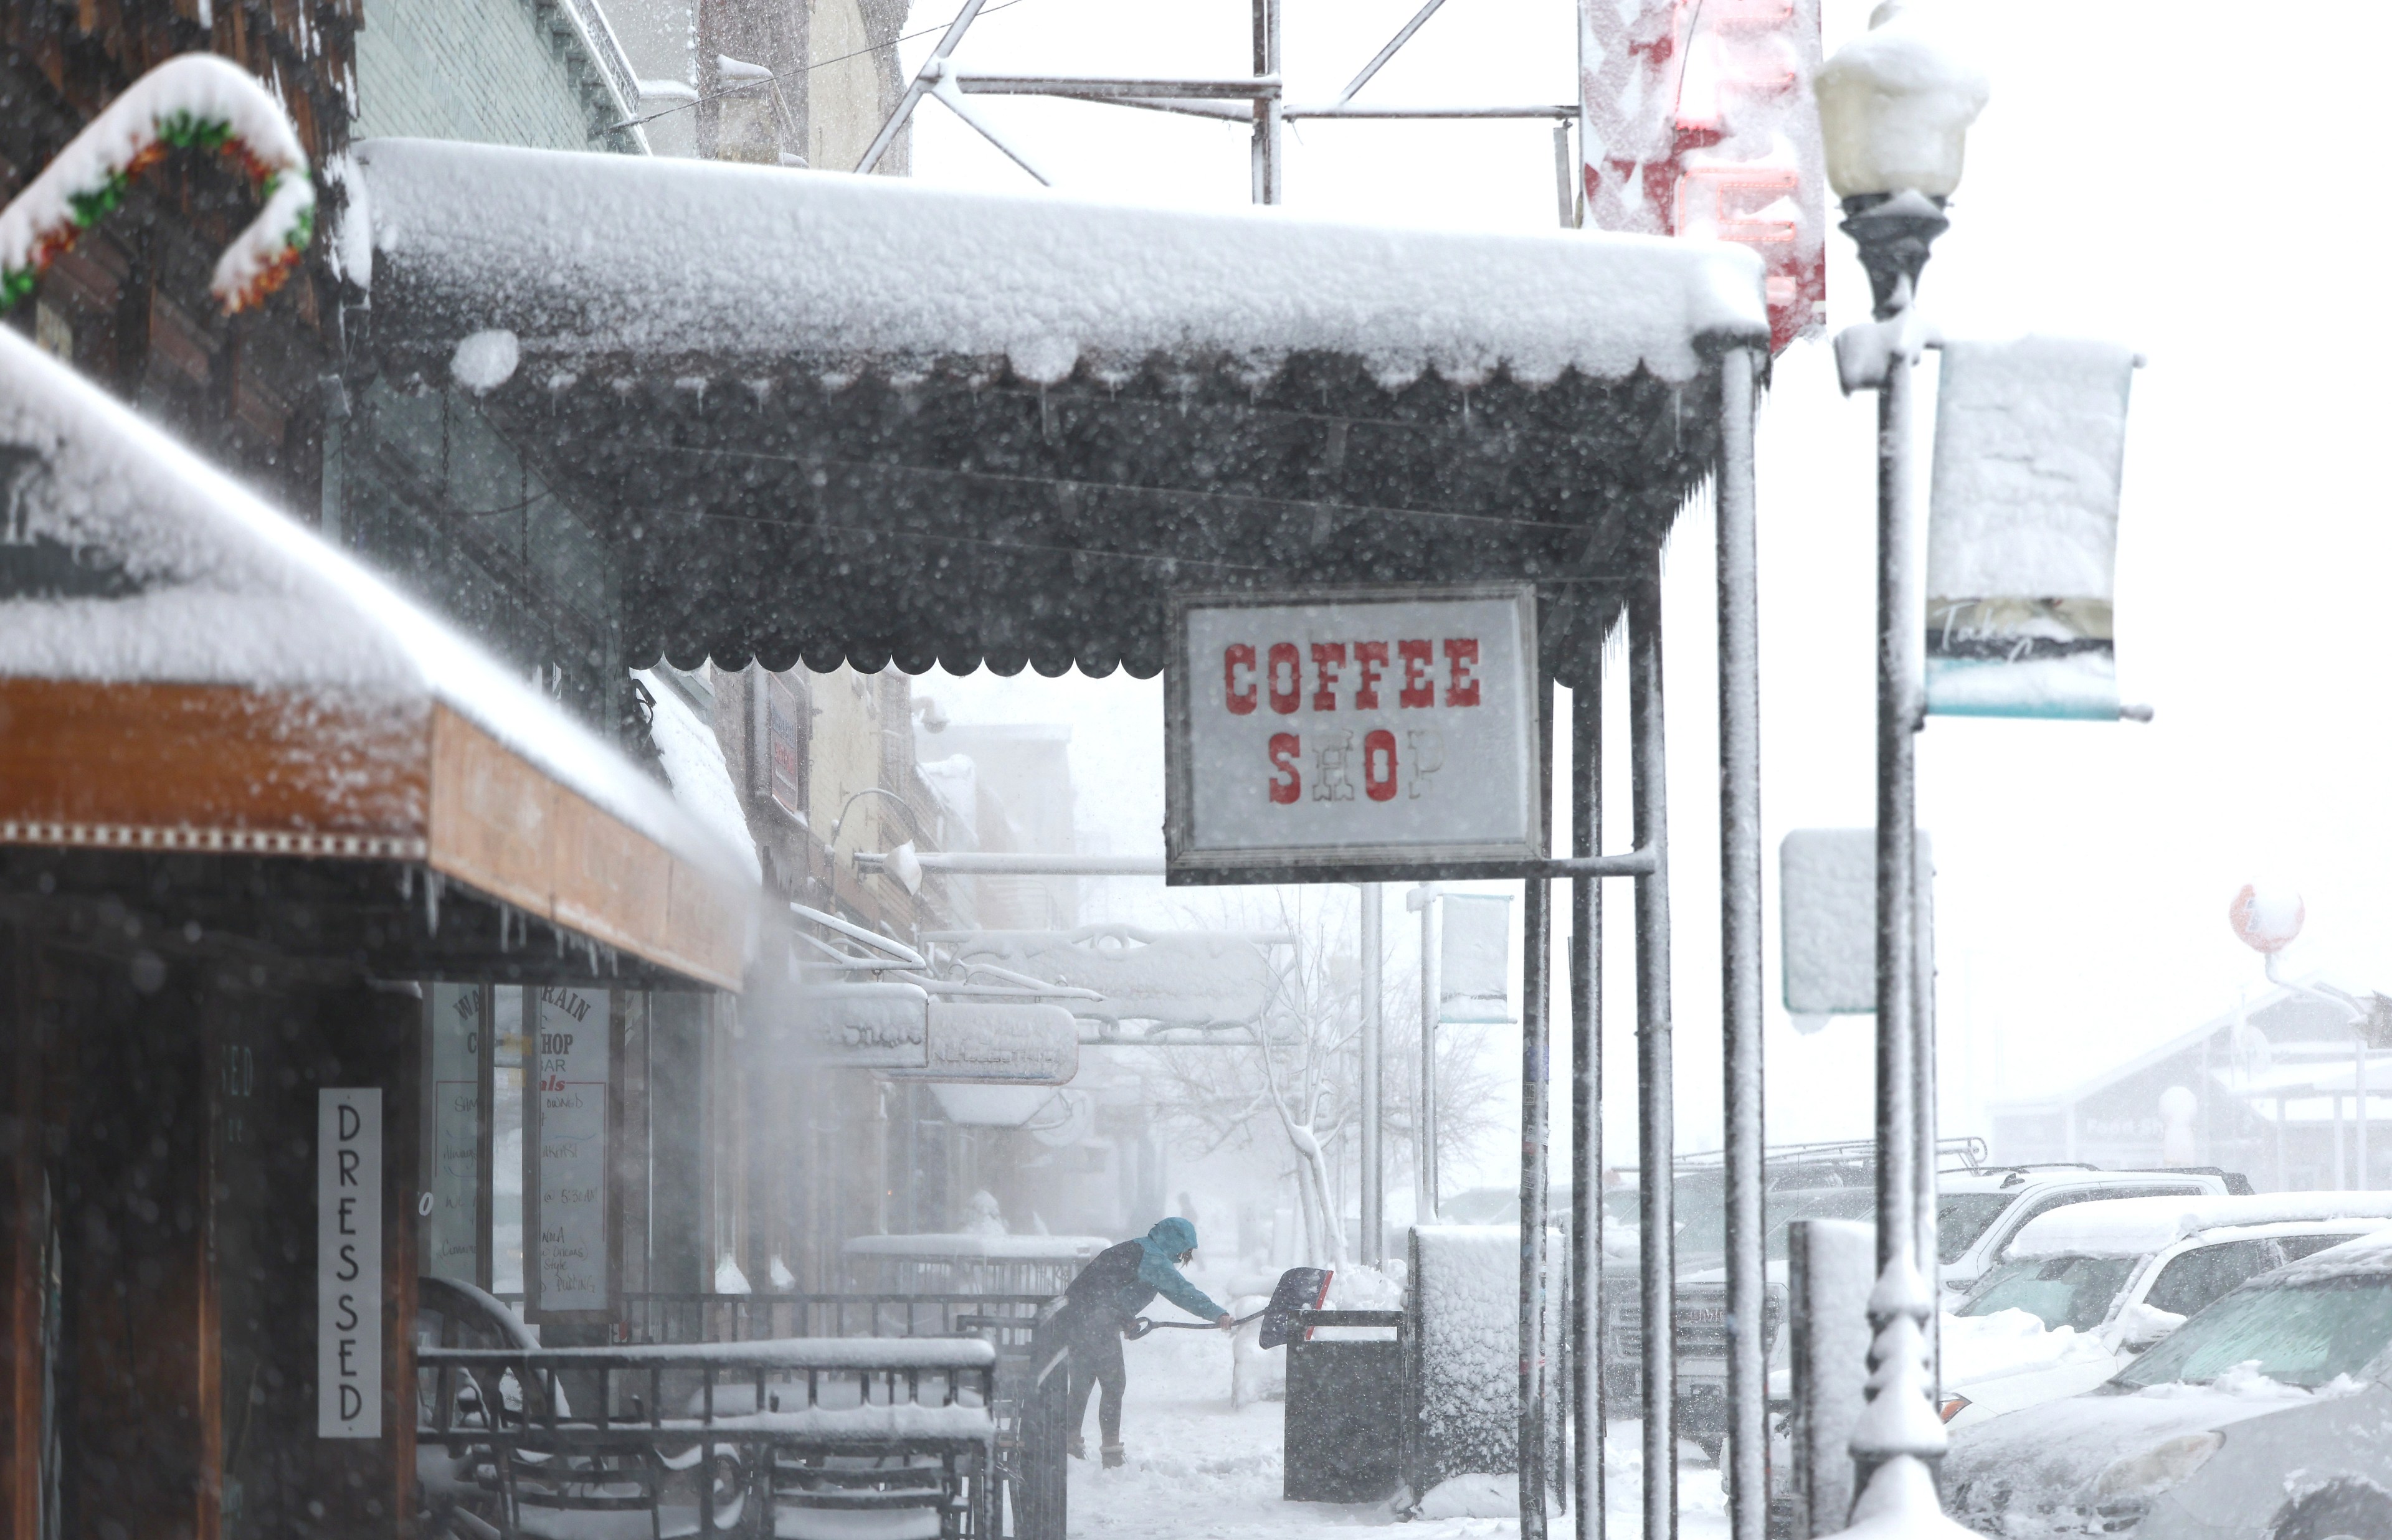 snow covers the awning of a coffee shop